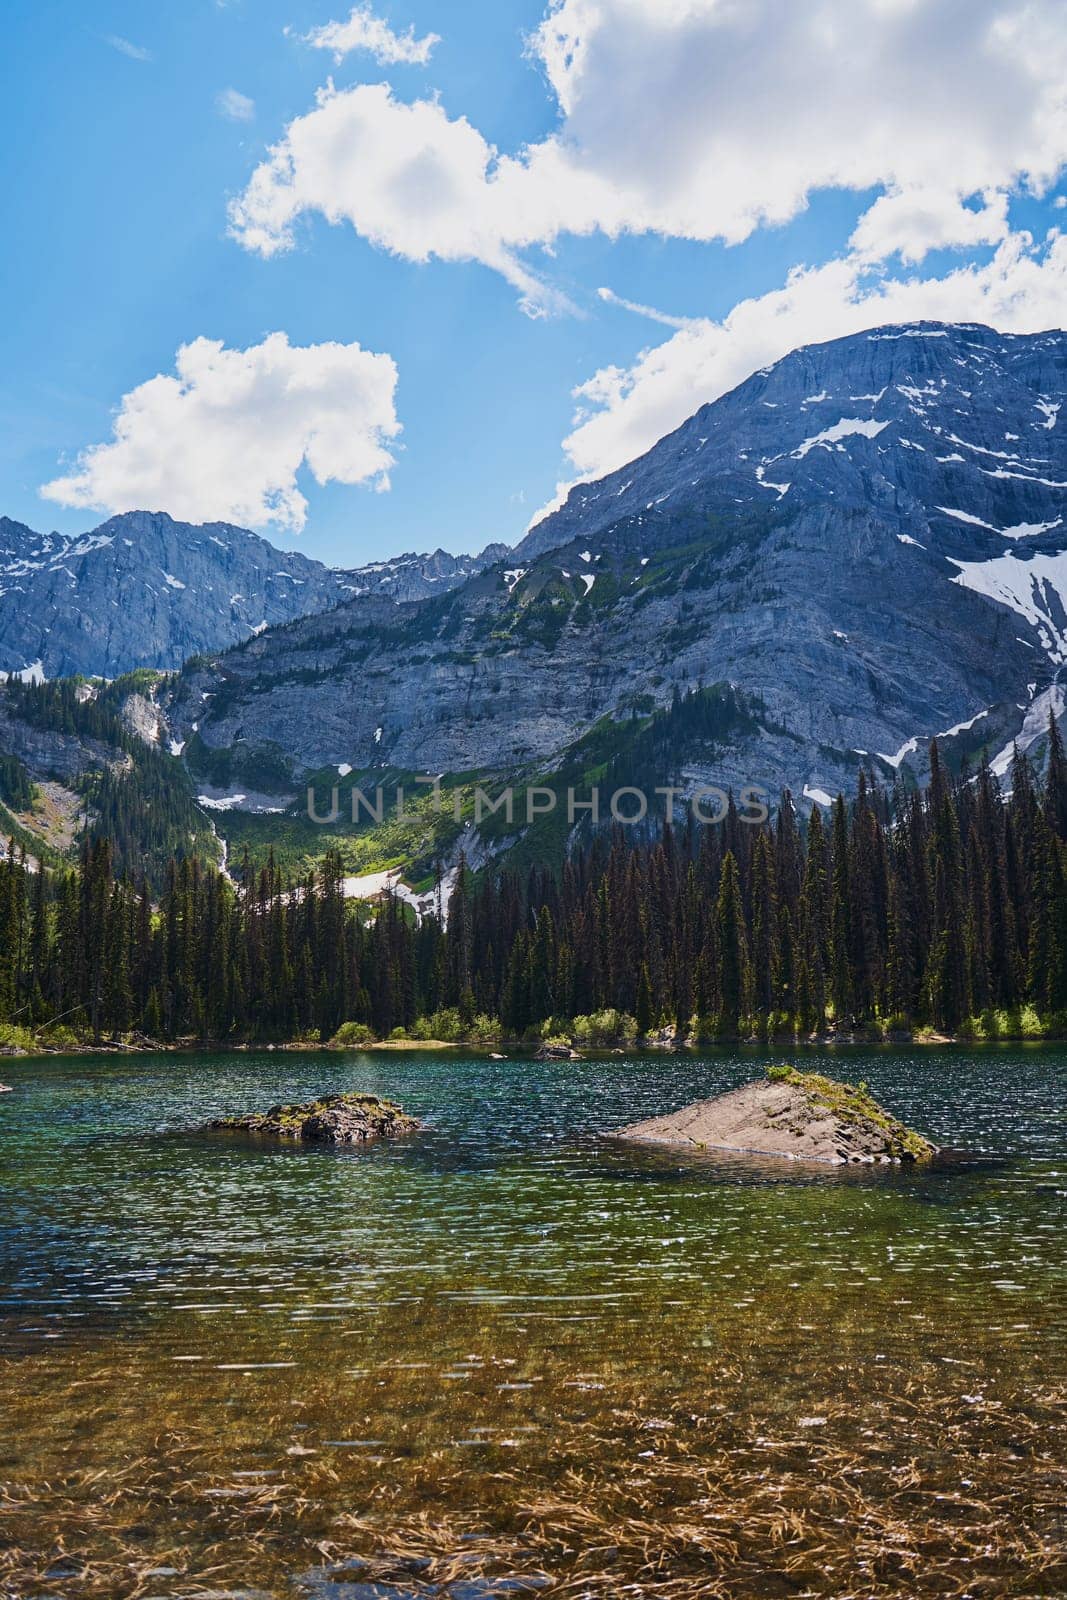 Incredibly beautiful transparent, emerald calm lake with reflection of rocky mountain on the Black Prince Cirque Trail. Majestic Canadian mountains with snow on sunny summer day in Alberta, Kananaskis by Try_my_best